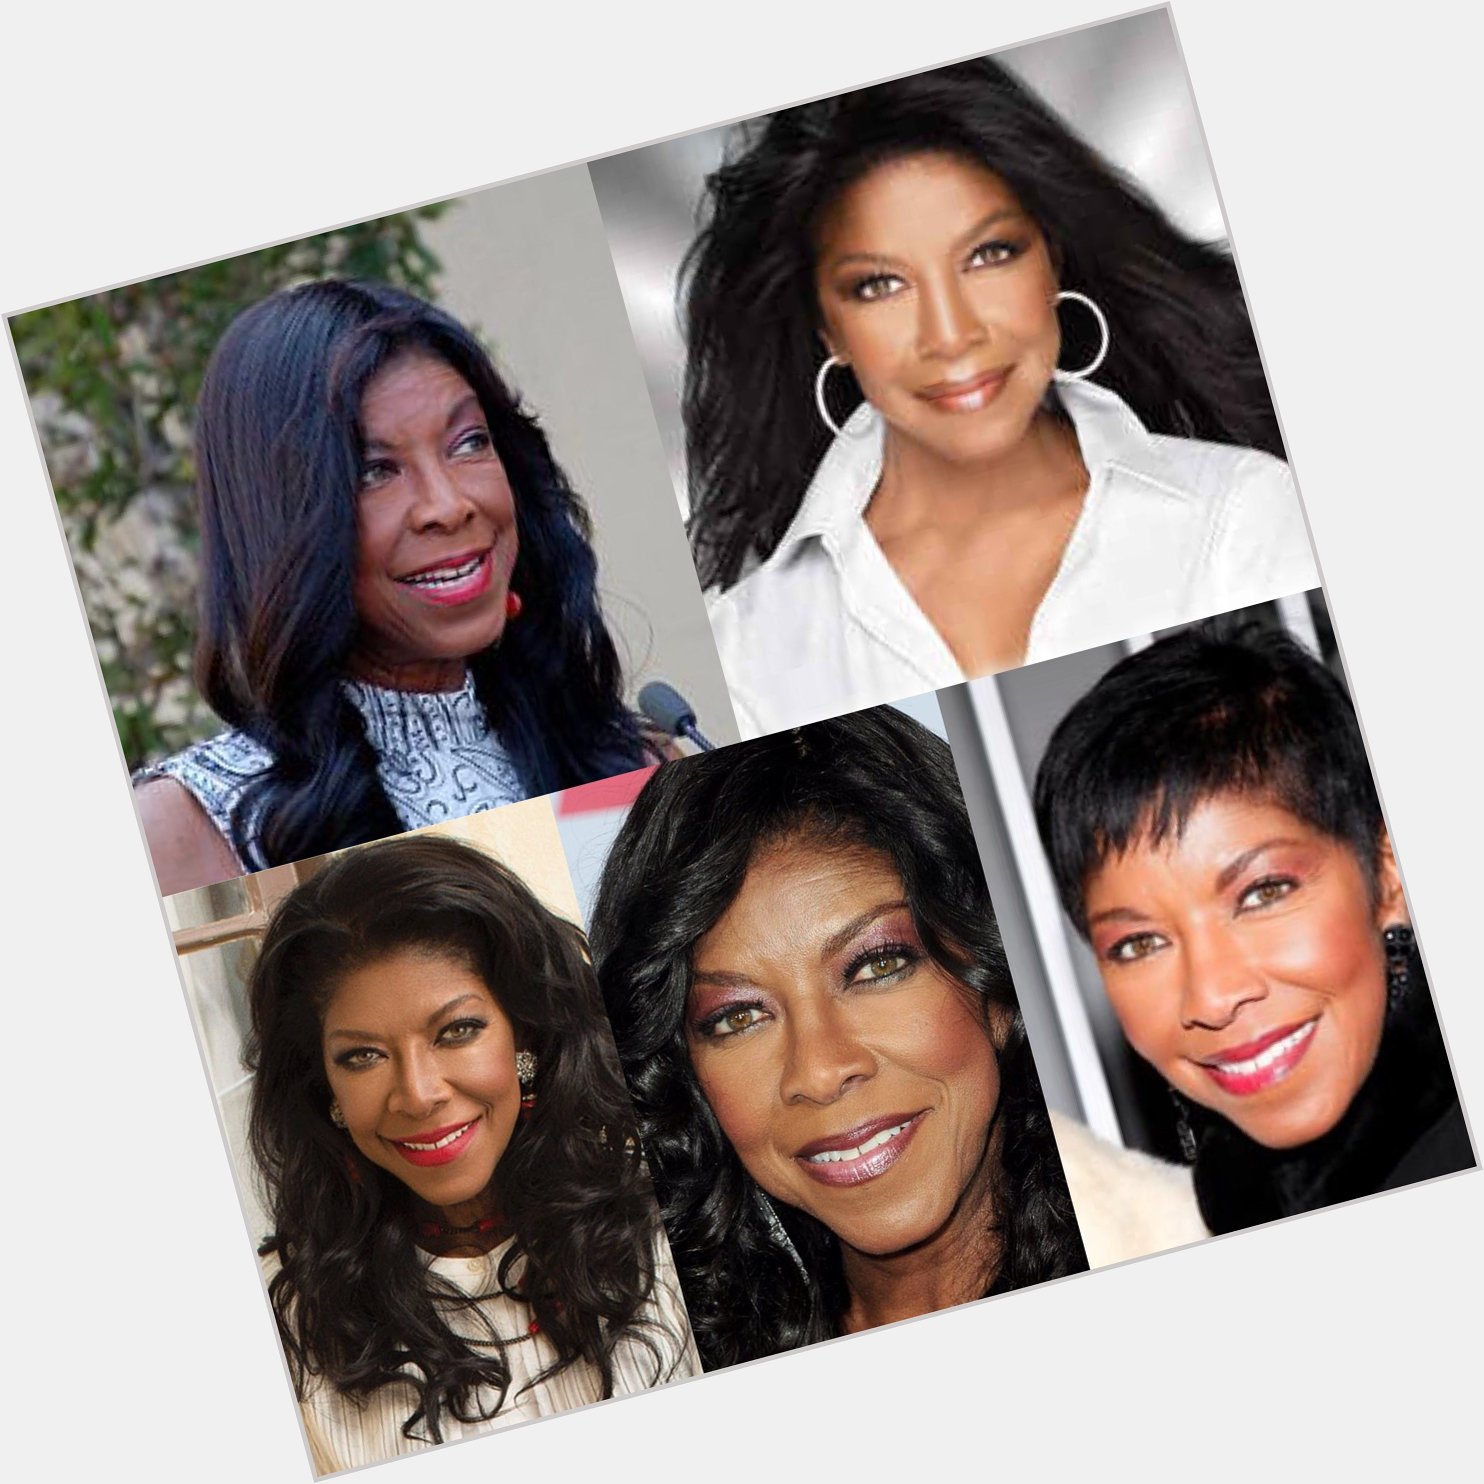 Happy 69 birthday to Natalie Cole up in heaven. May she Rest In Peace.  